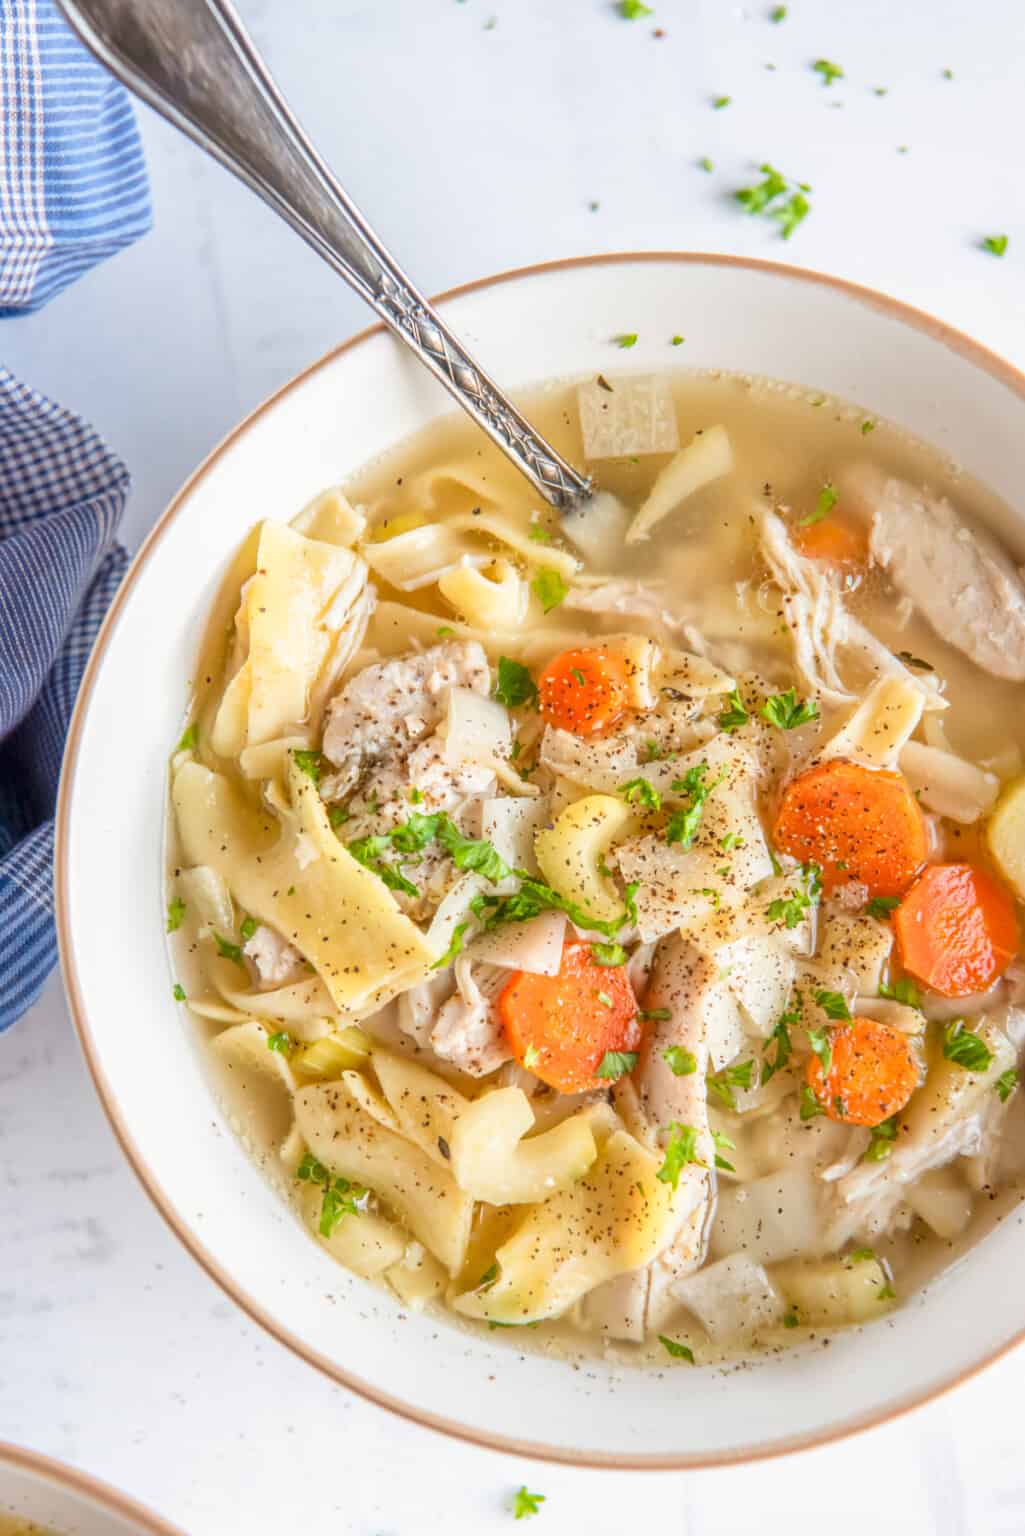 Crockpot Chicken Noodle Soup Recipe - The Cookie Rookie®